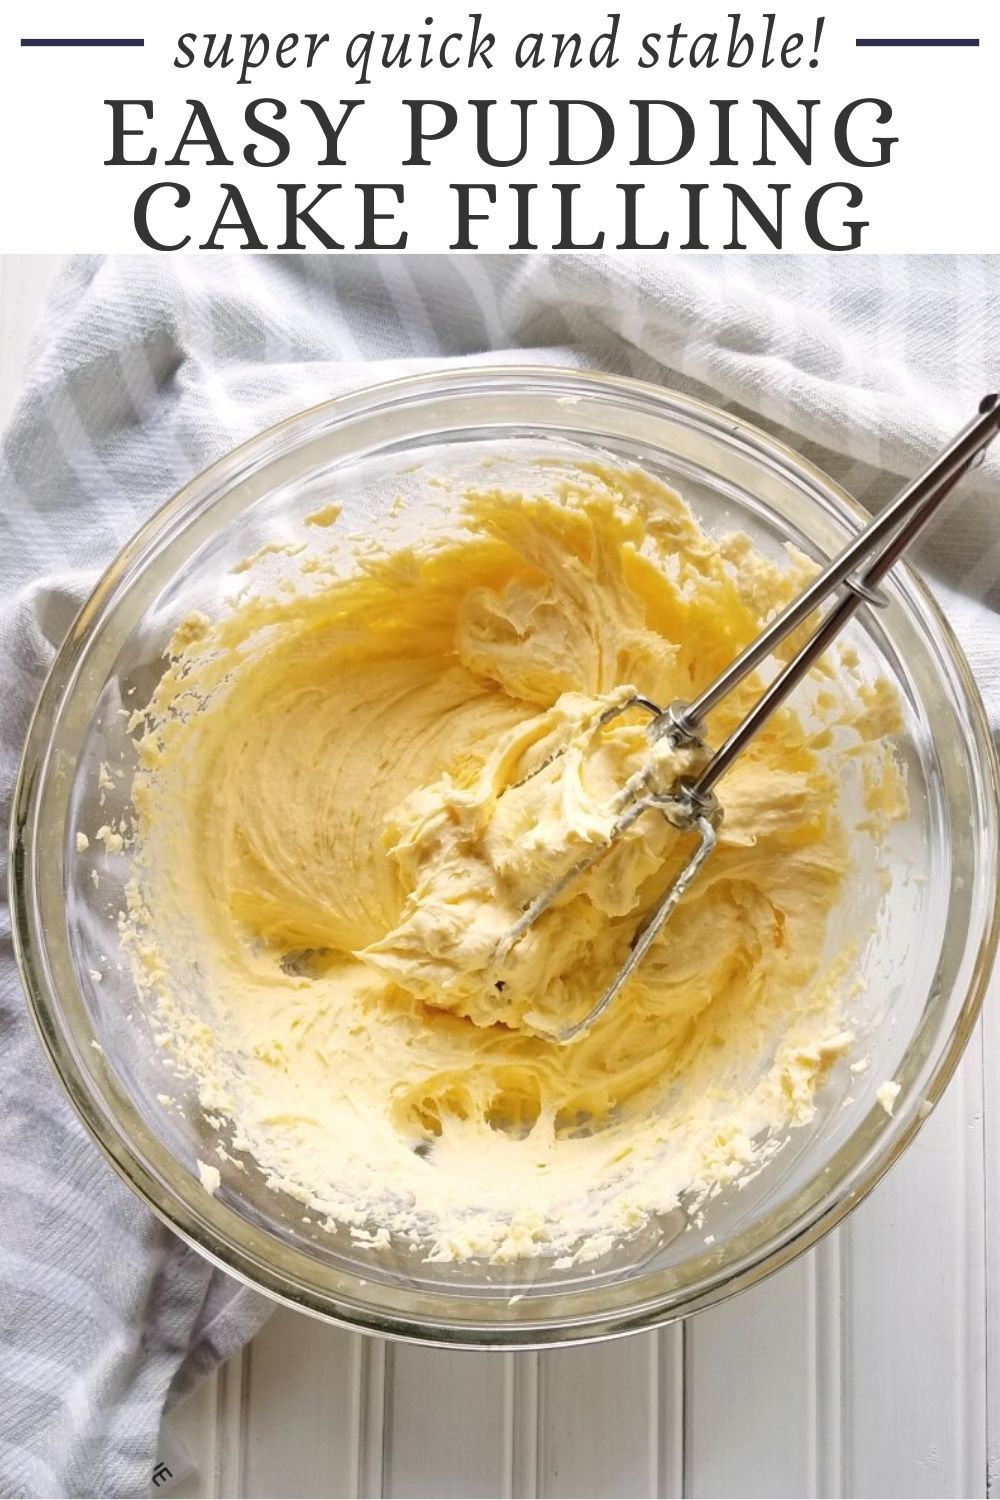 This thick and stable vanilla pudding is perfect for filling cakes, eclairs, cream puffs, donuts and more. Using this shortcut gives you Bavarian cream style filling in just minutes!